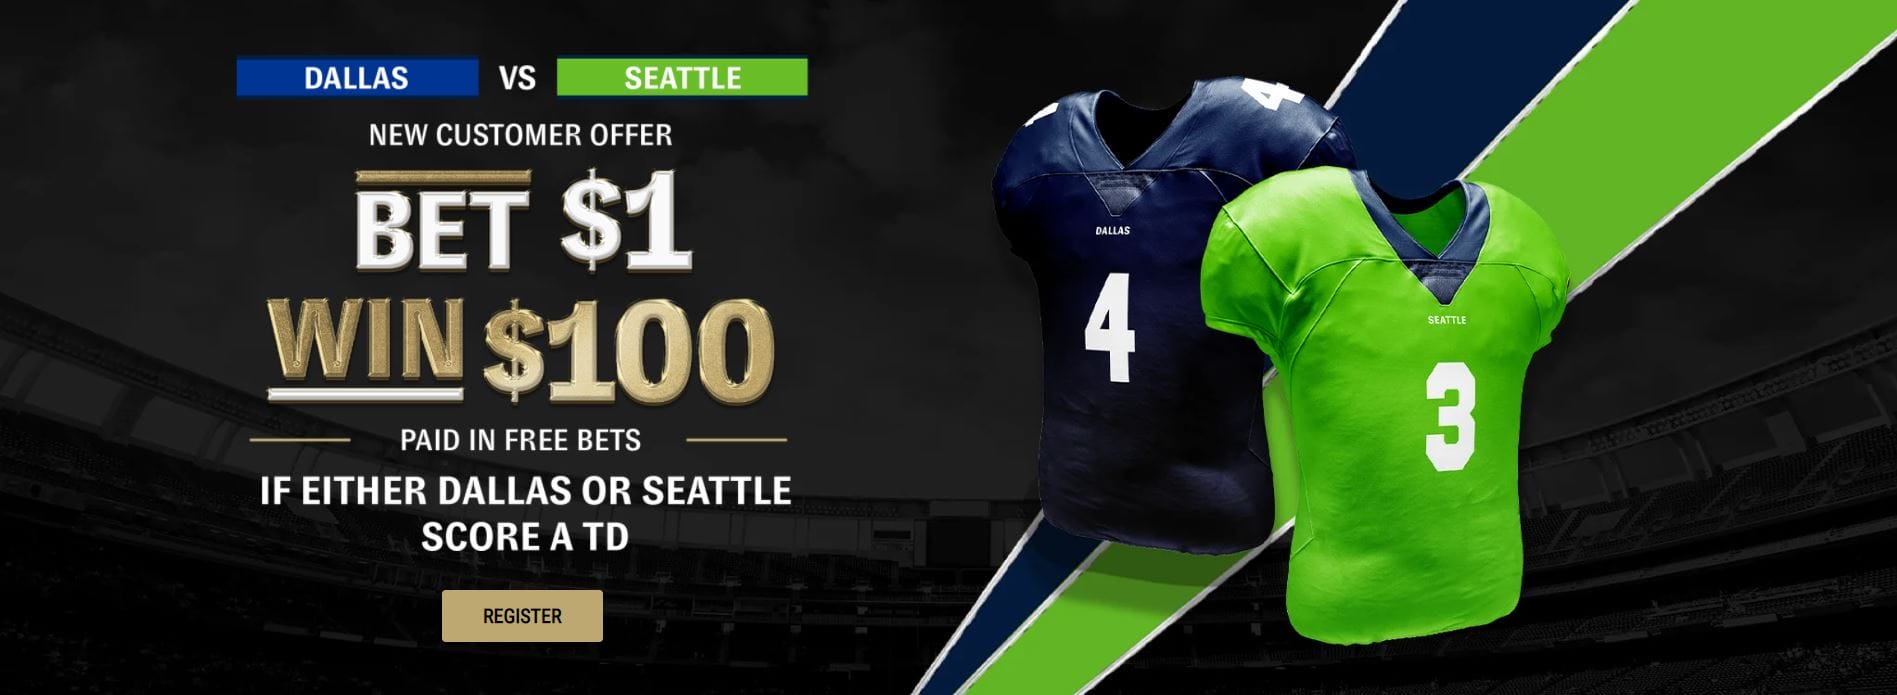 Bet $1 win $100 new customers offer banner for the Dallas vs Seattle NFL game